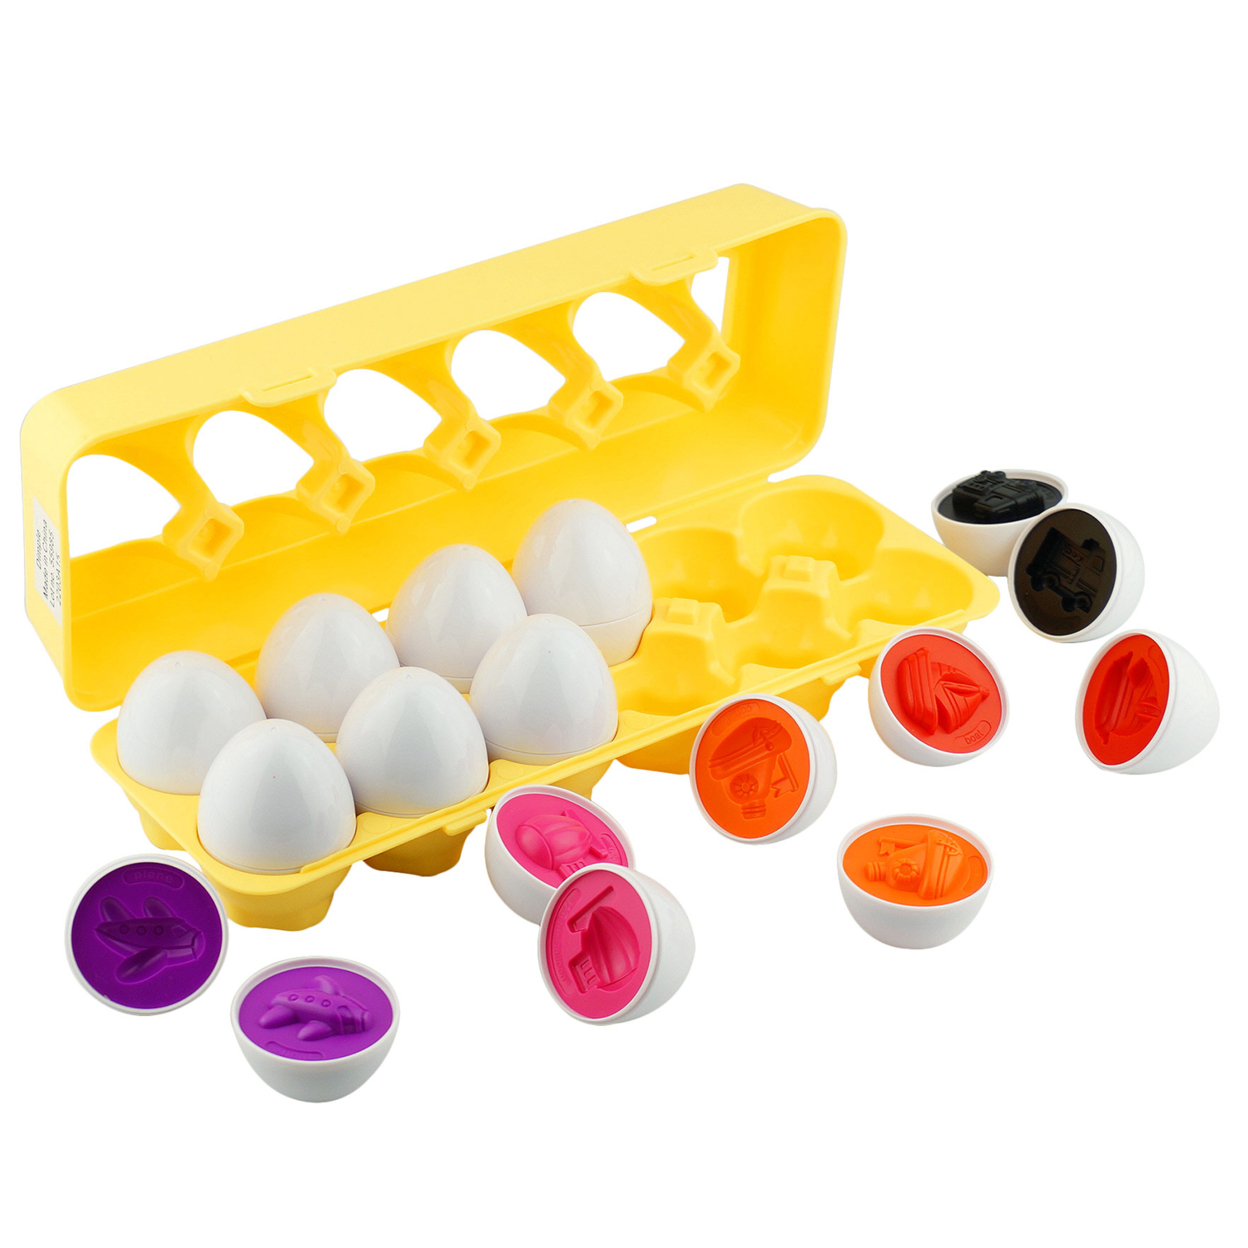 Dimple 12 Match And Play Vehicle Car Matching Egg Easter Toy With Holder - Toddler STEM Toys - Colors And Shapes Recognition Toys For Kids